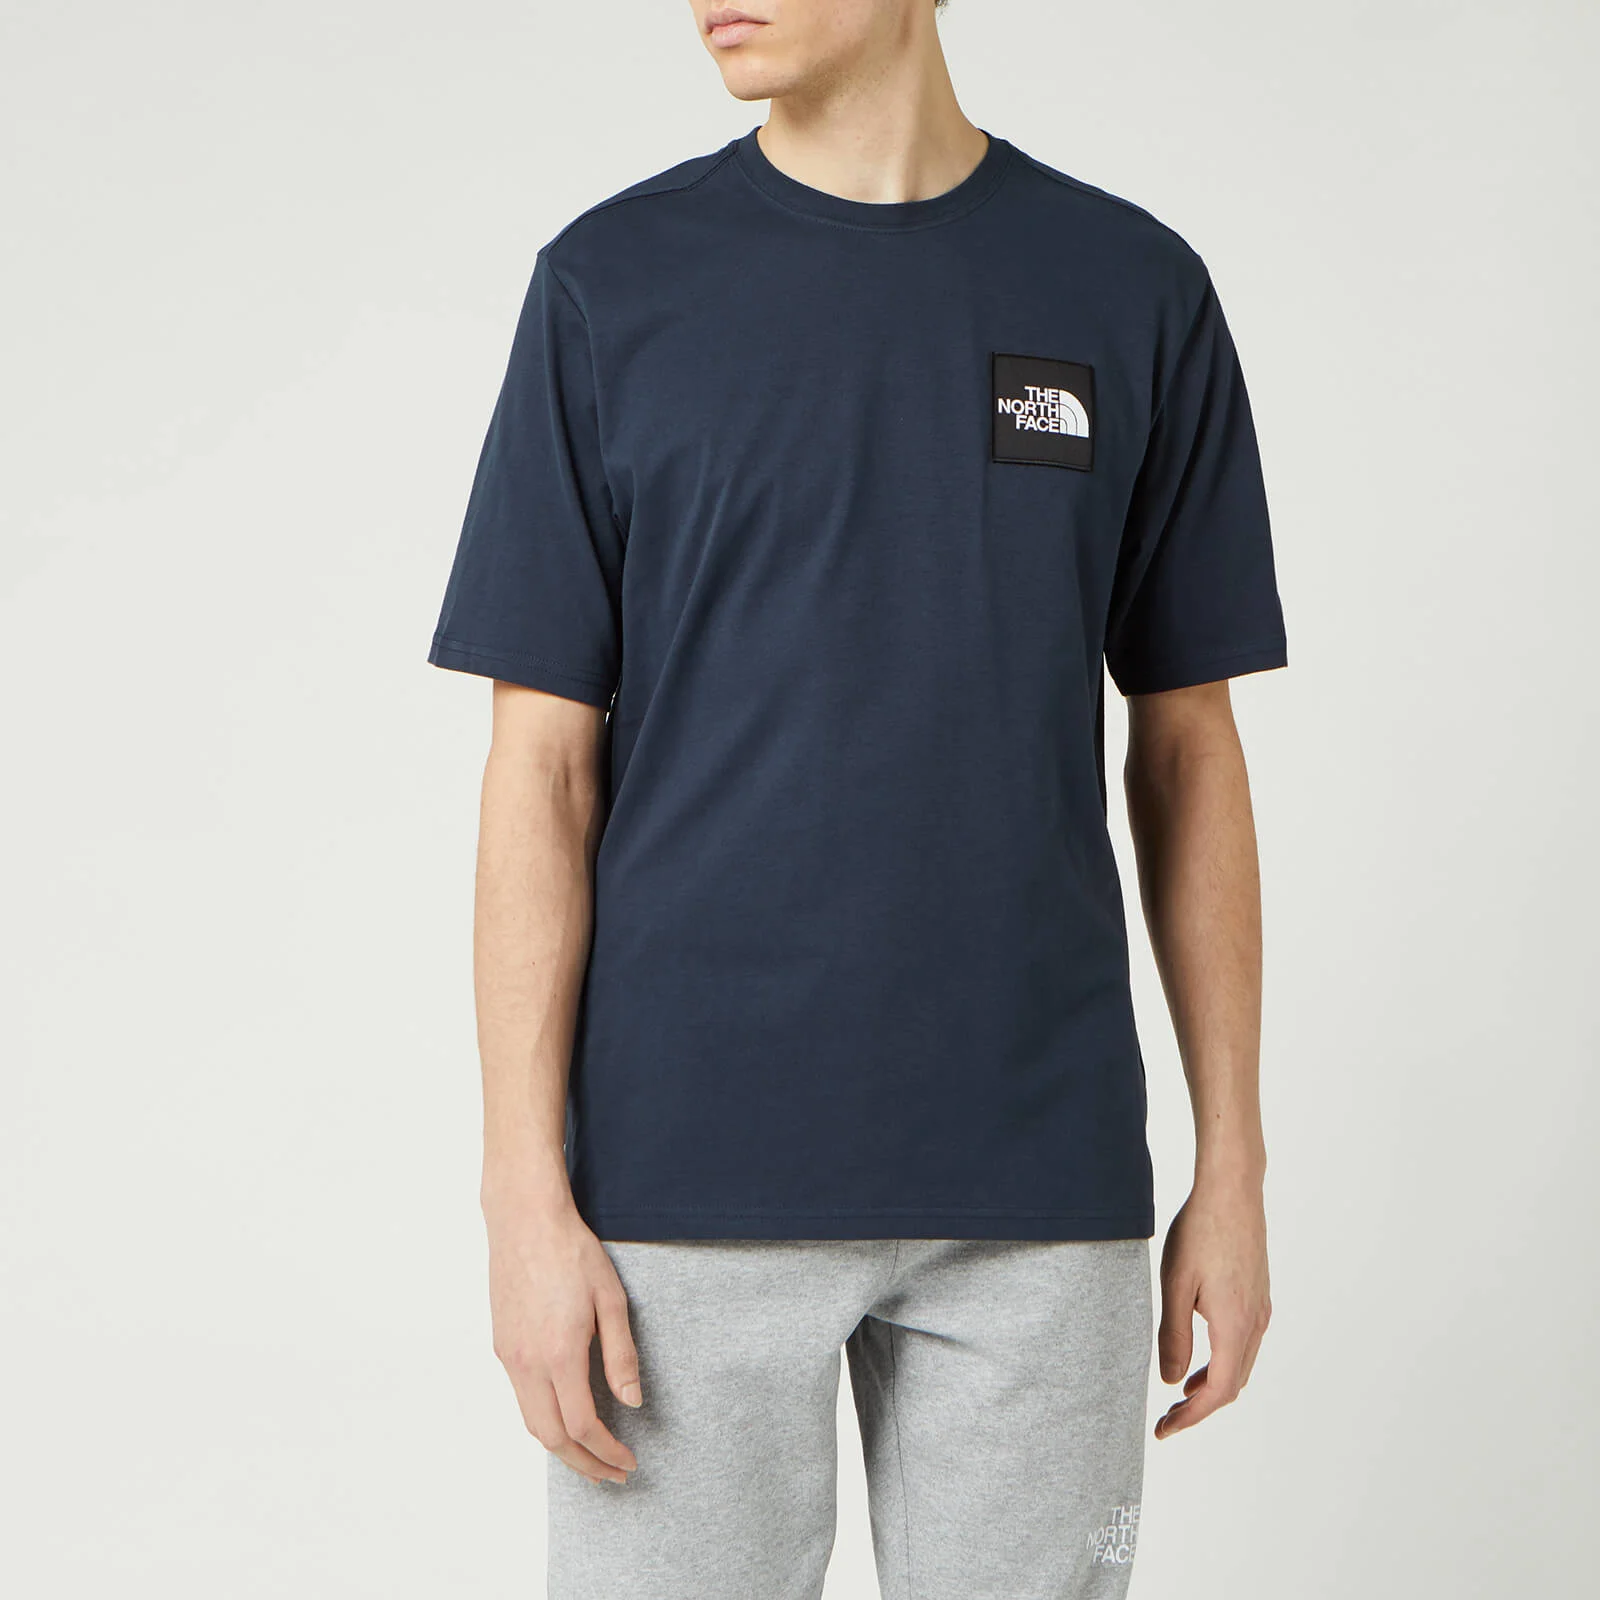 The North Face Men's Masters of Stone T-Shirt - Urban Navy Image 1